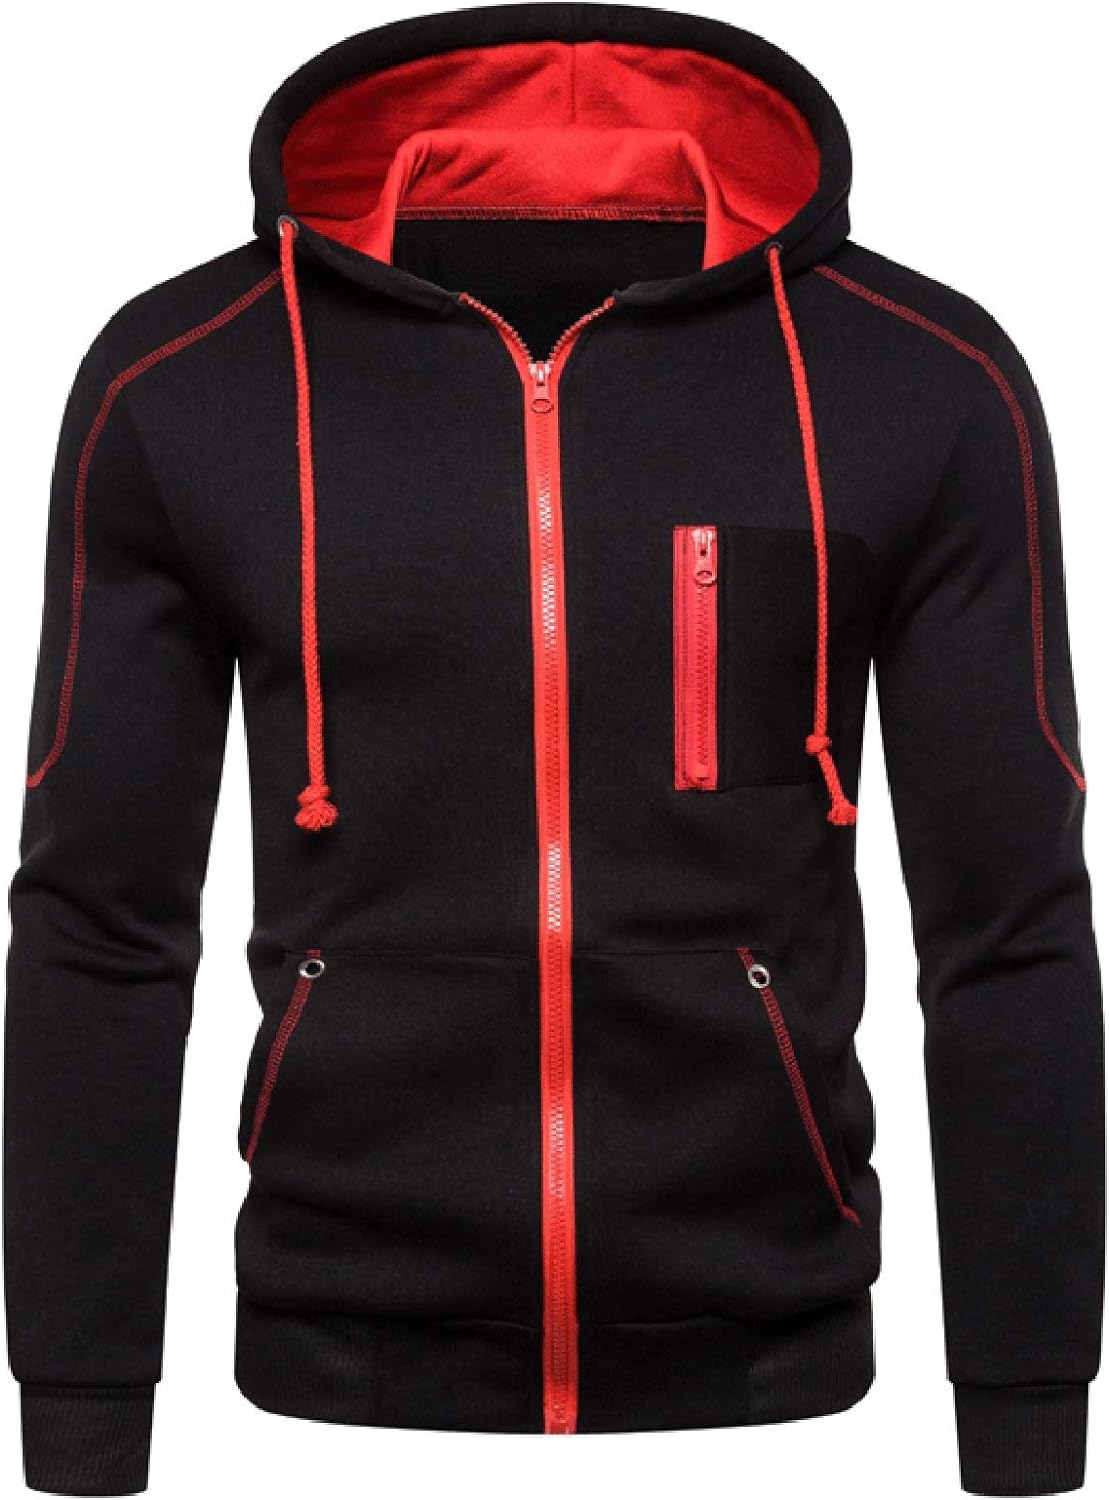 Need A Comfy Hoodie That Fits: Why The 5XL Zip Up Hoodie Is A Must For Big & Tall Guys